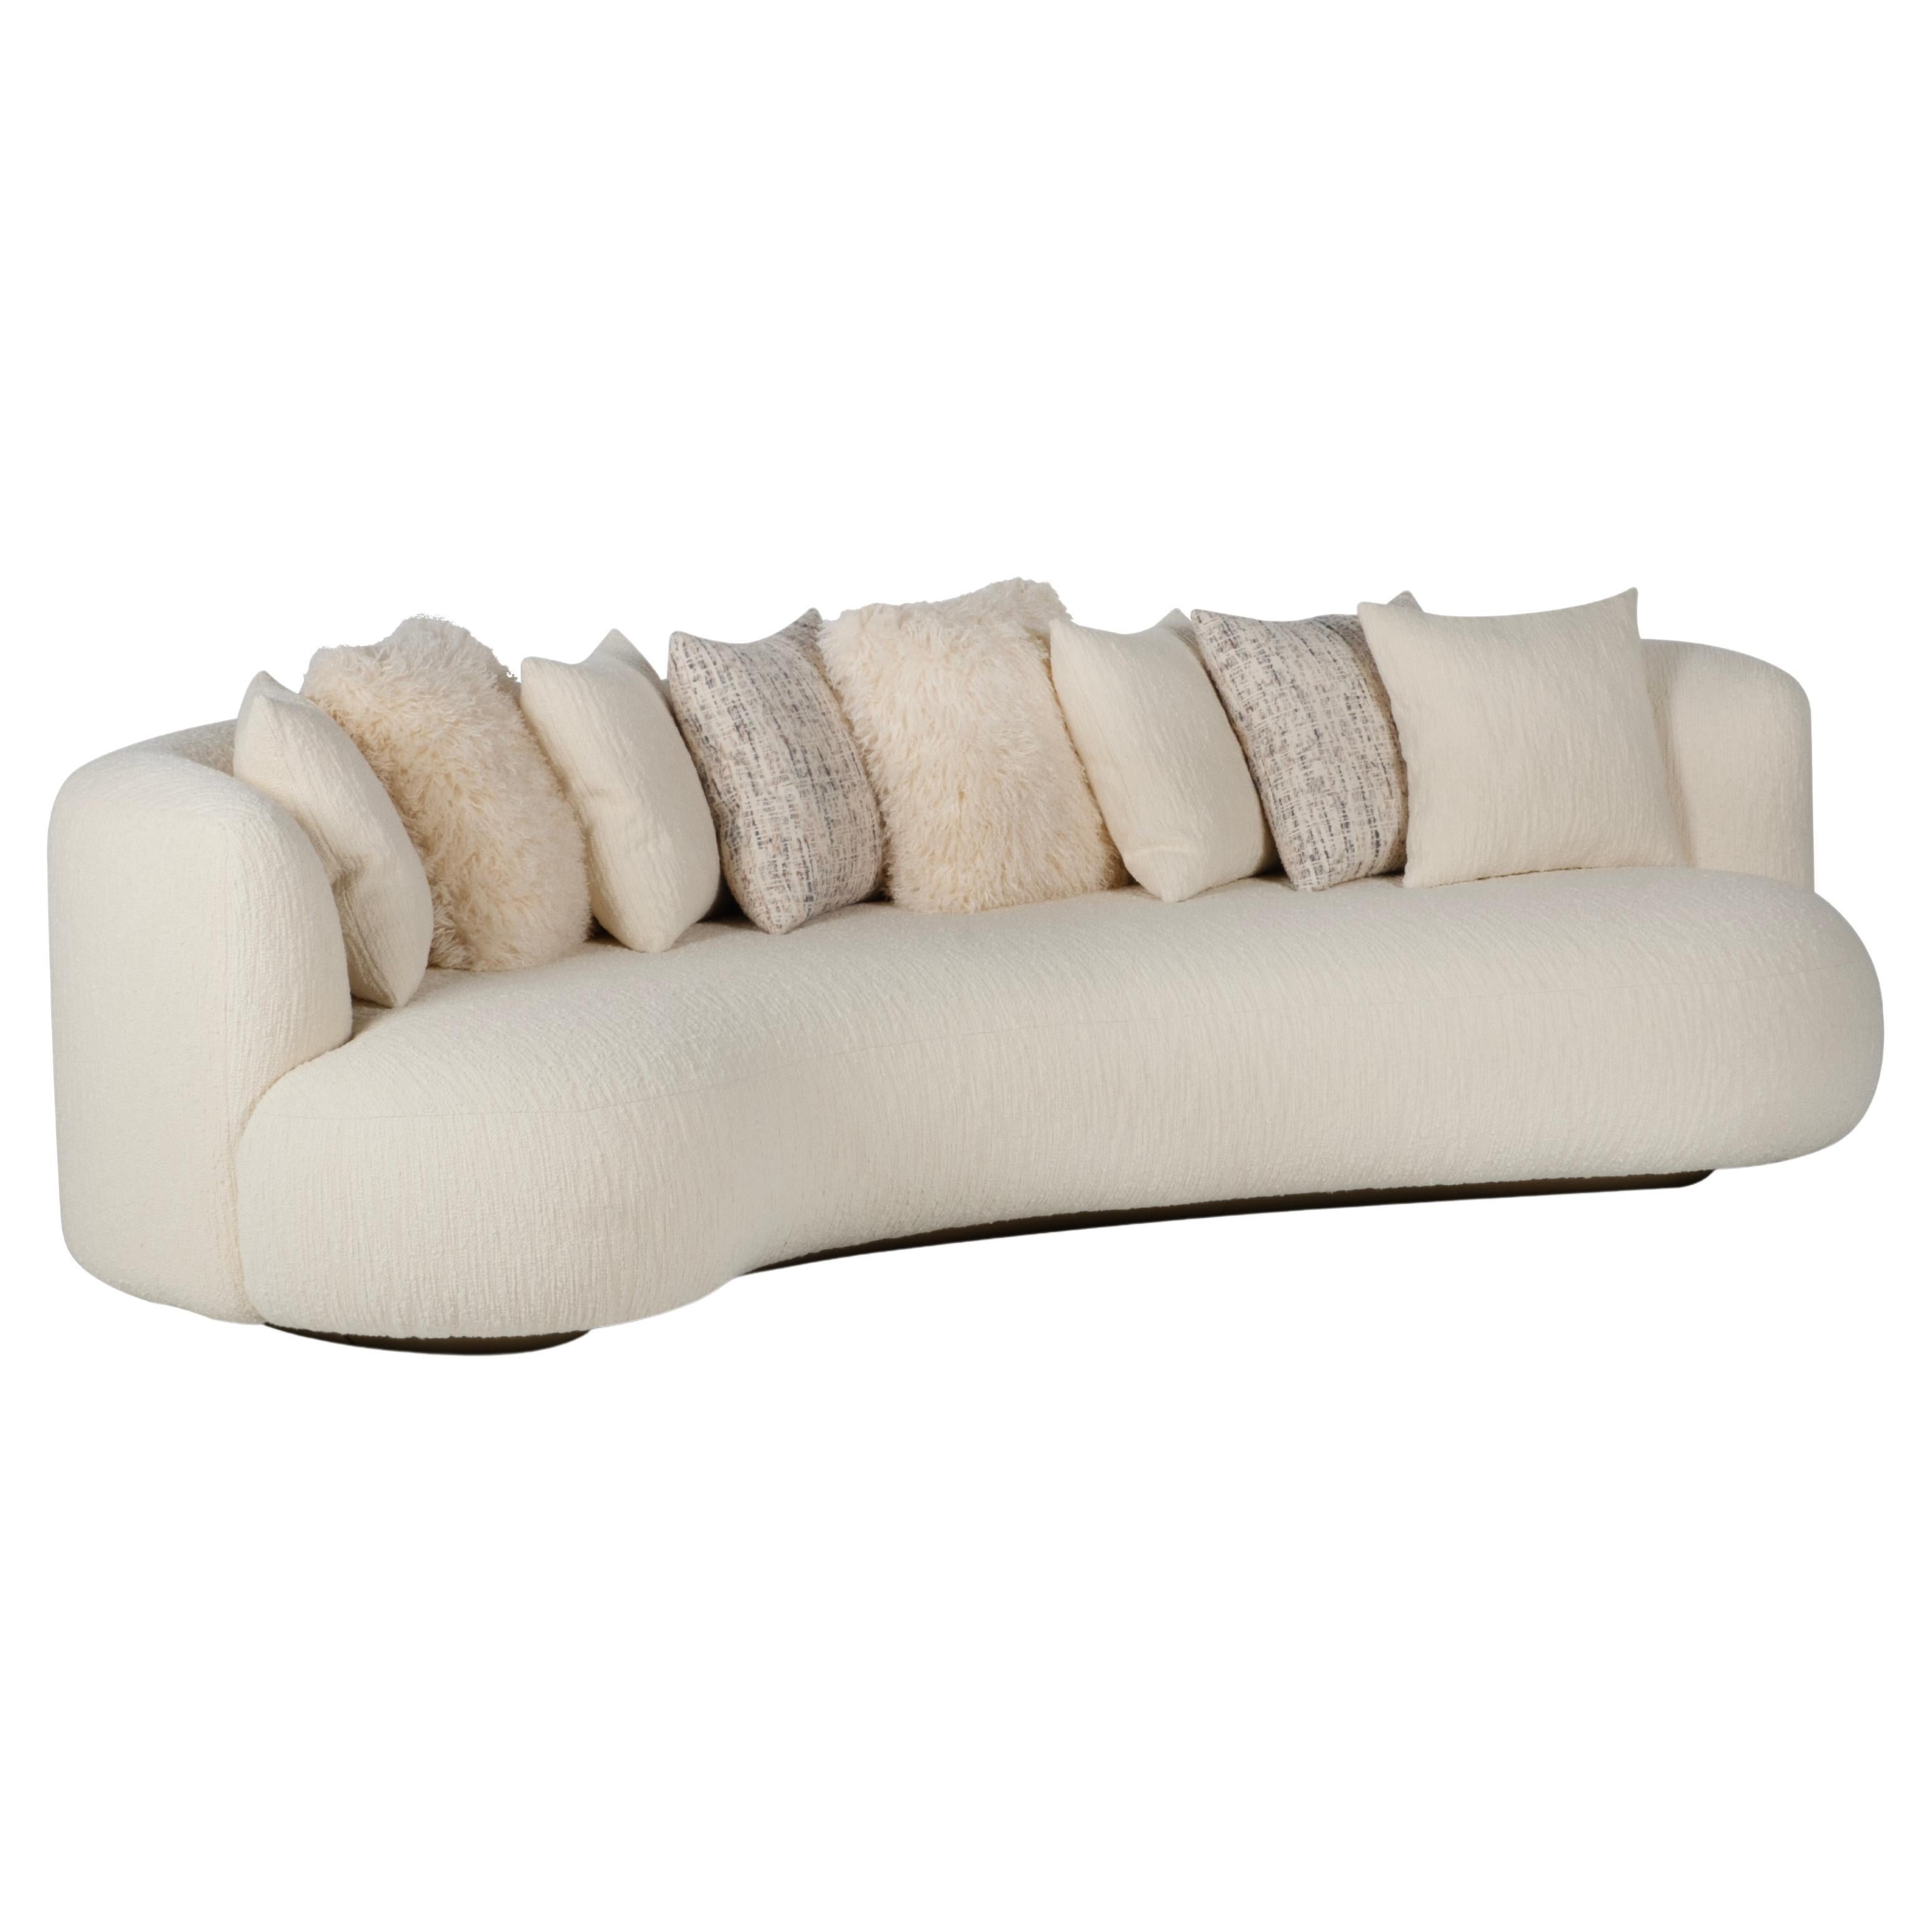 The Moderns Twins Curved Couch, Beige Bouclé, Handmade in Portugal by Greenapple